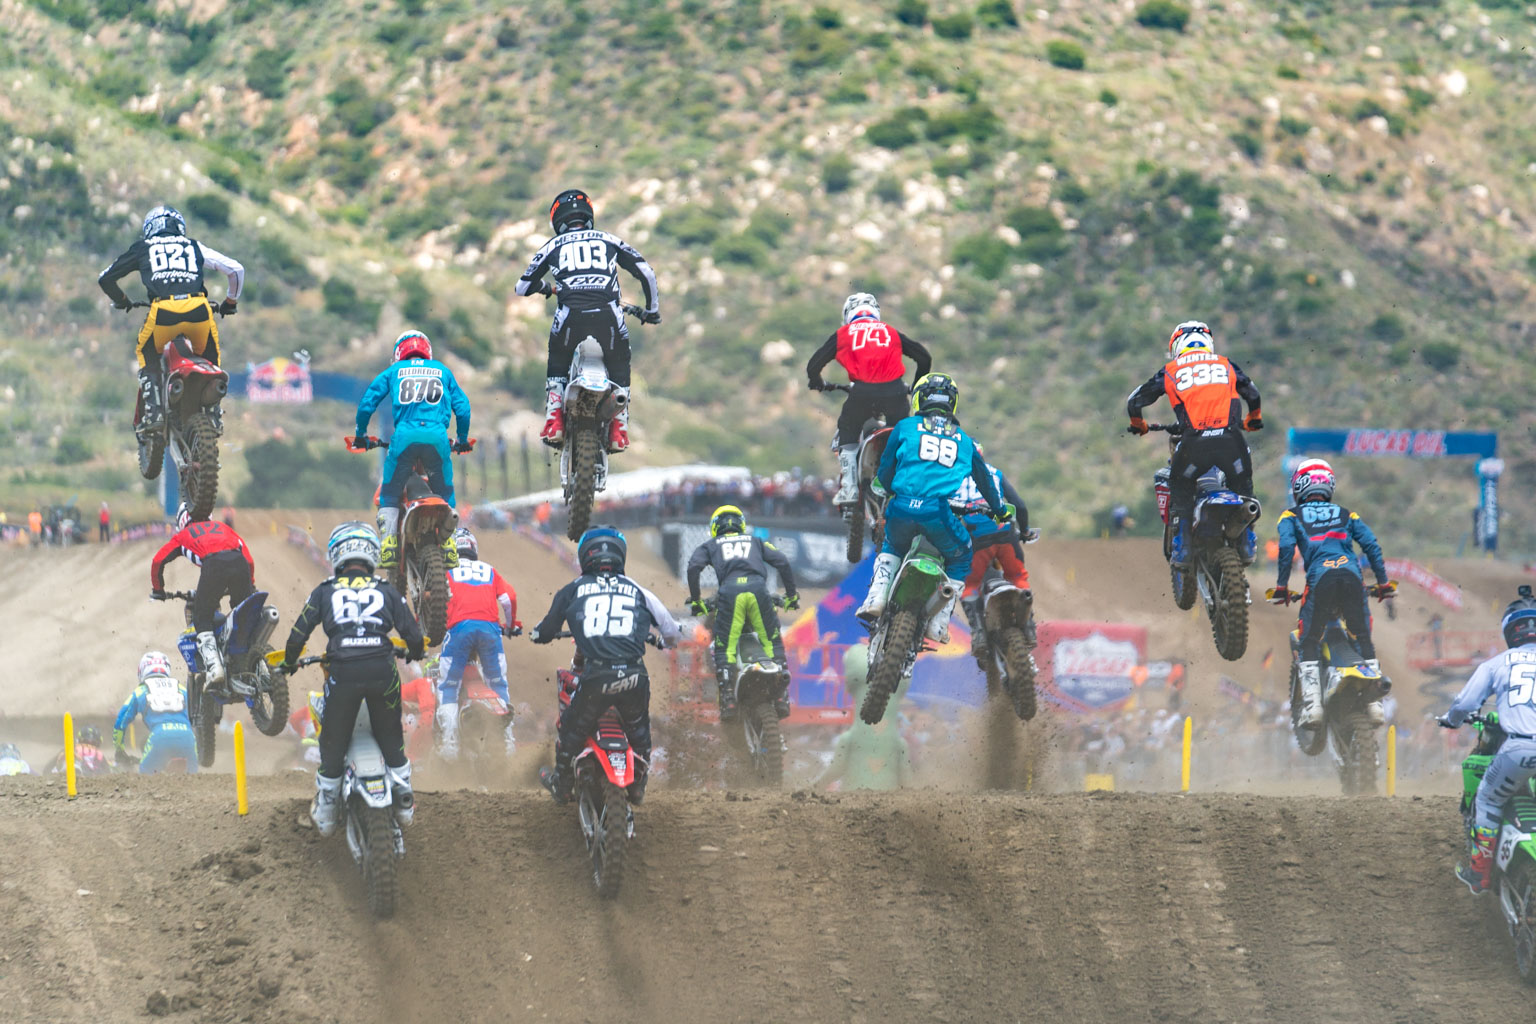 Watch AMA motocross replays free until May